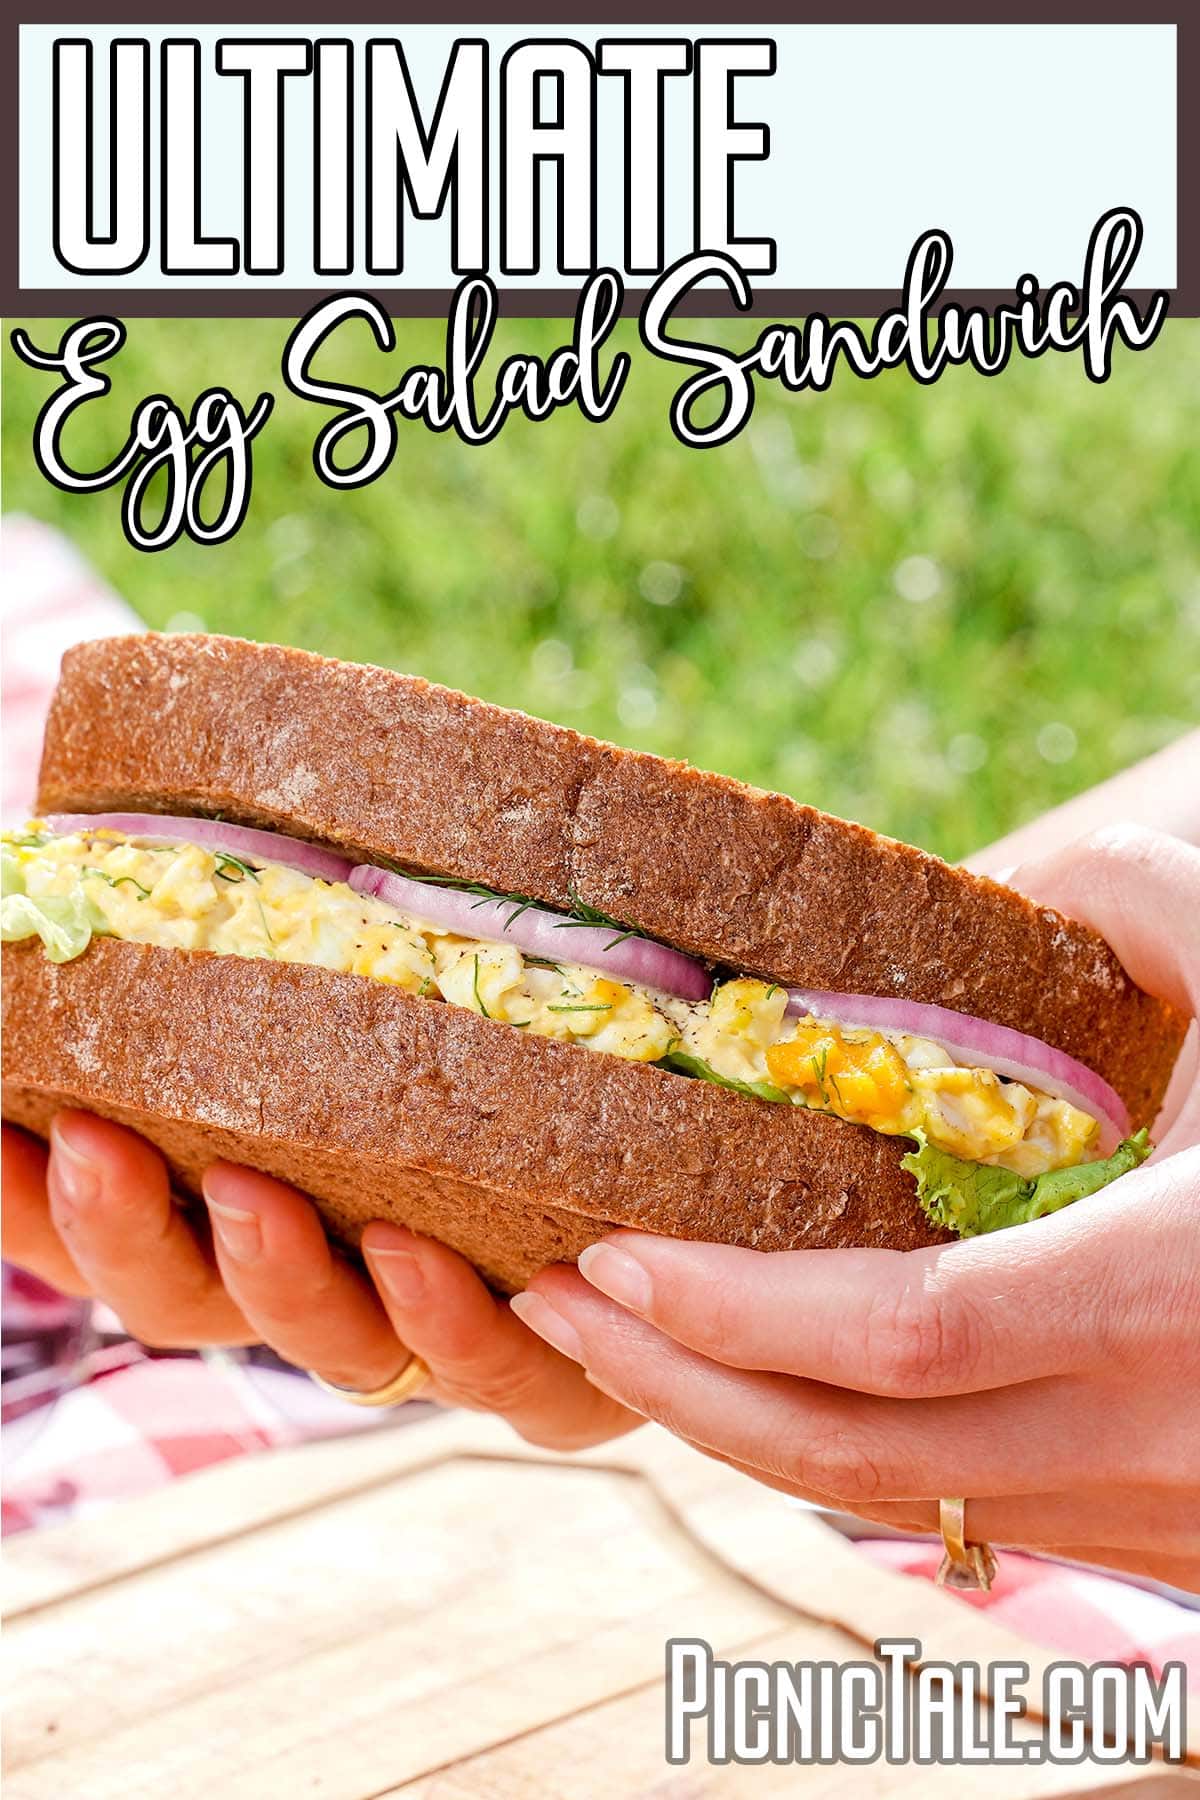 Ultimate egg salad sandwich, held outside with lettering at the top.